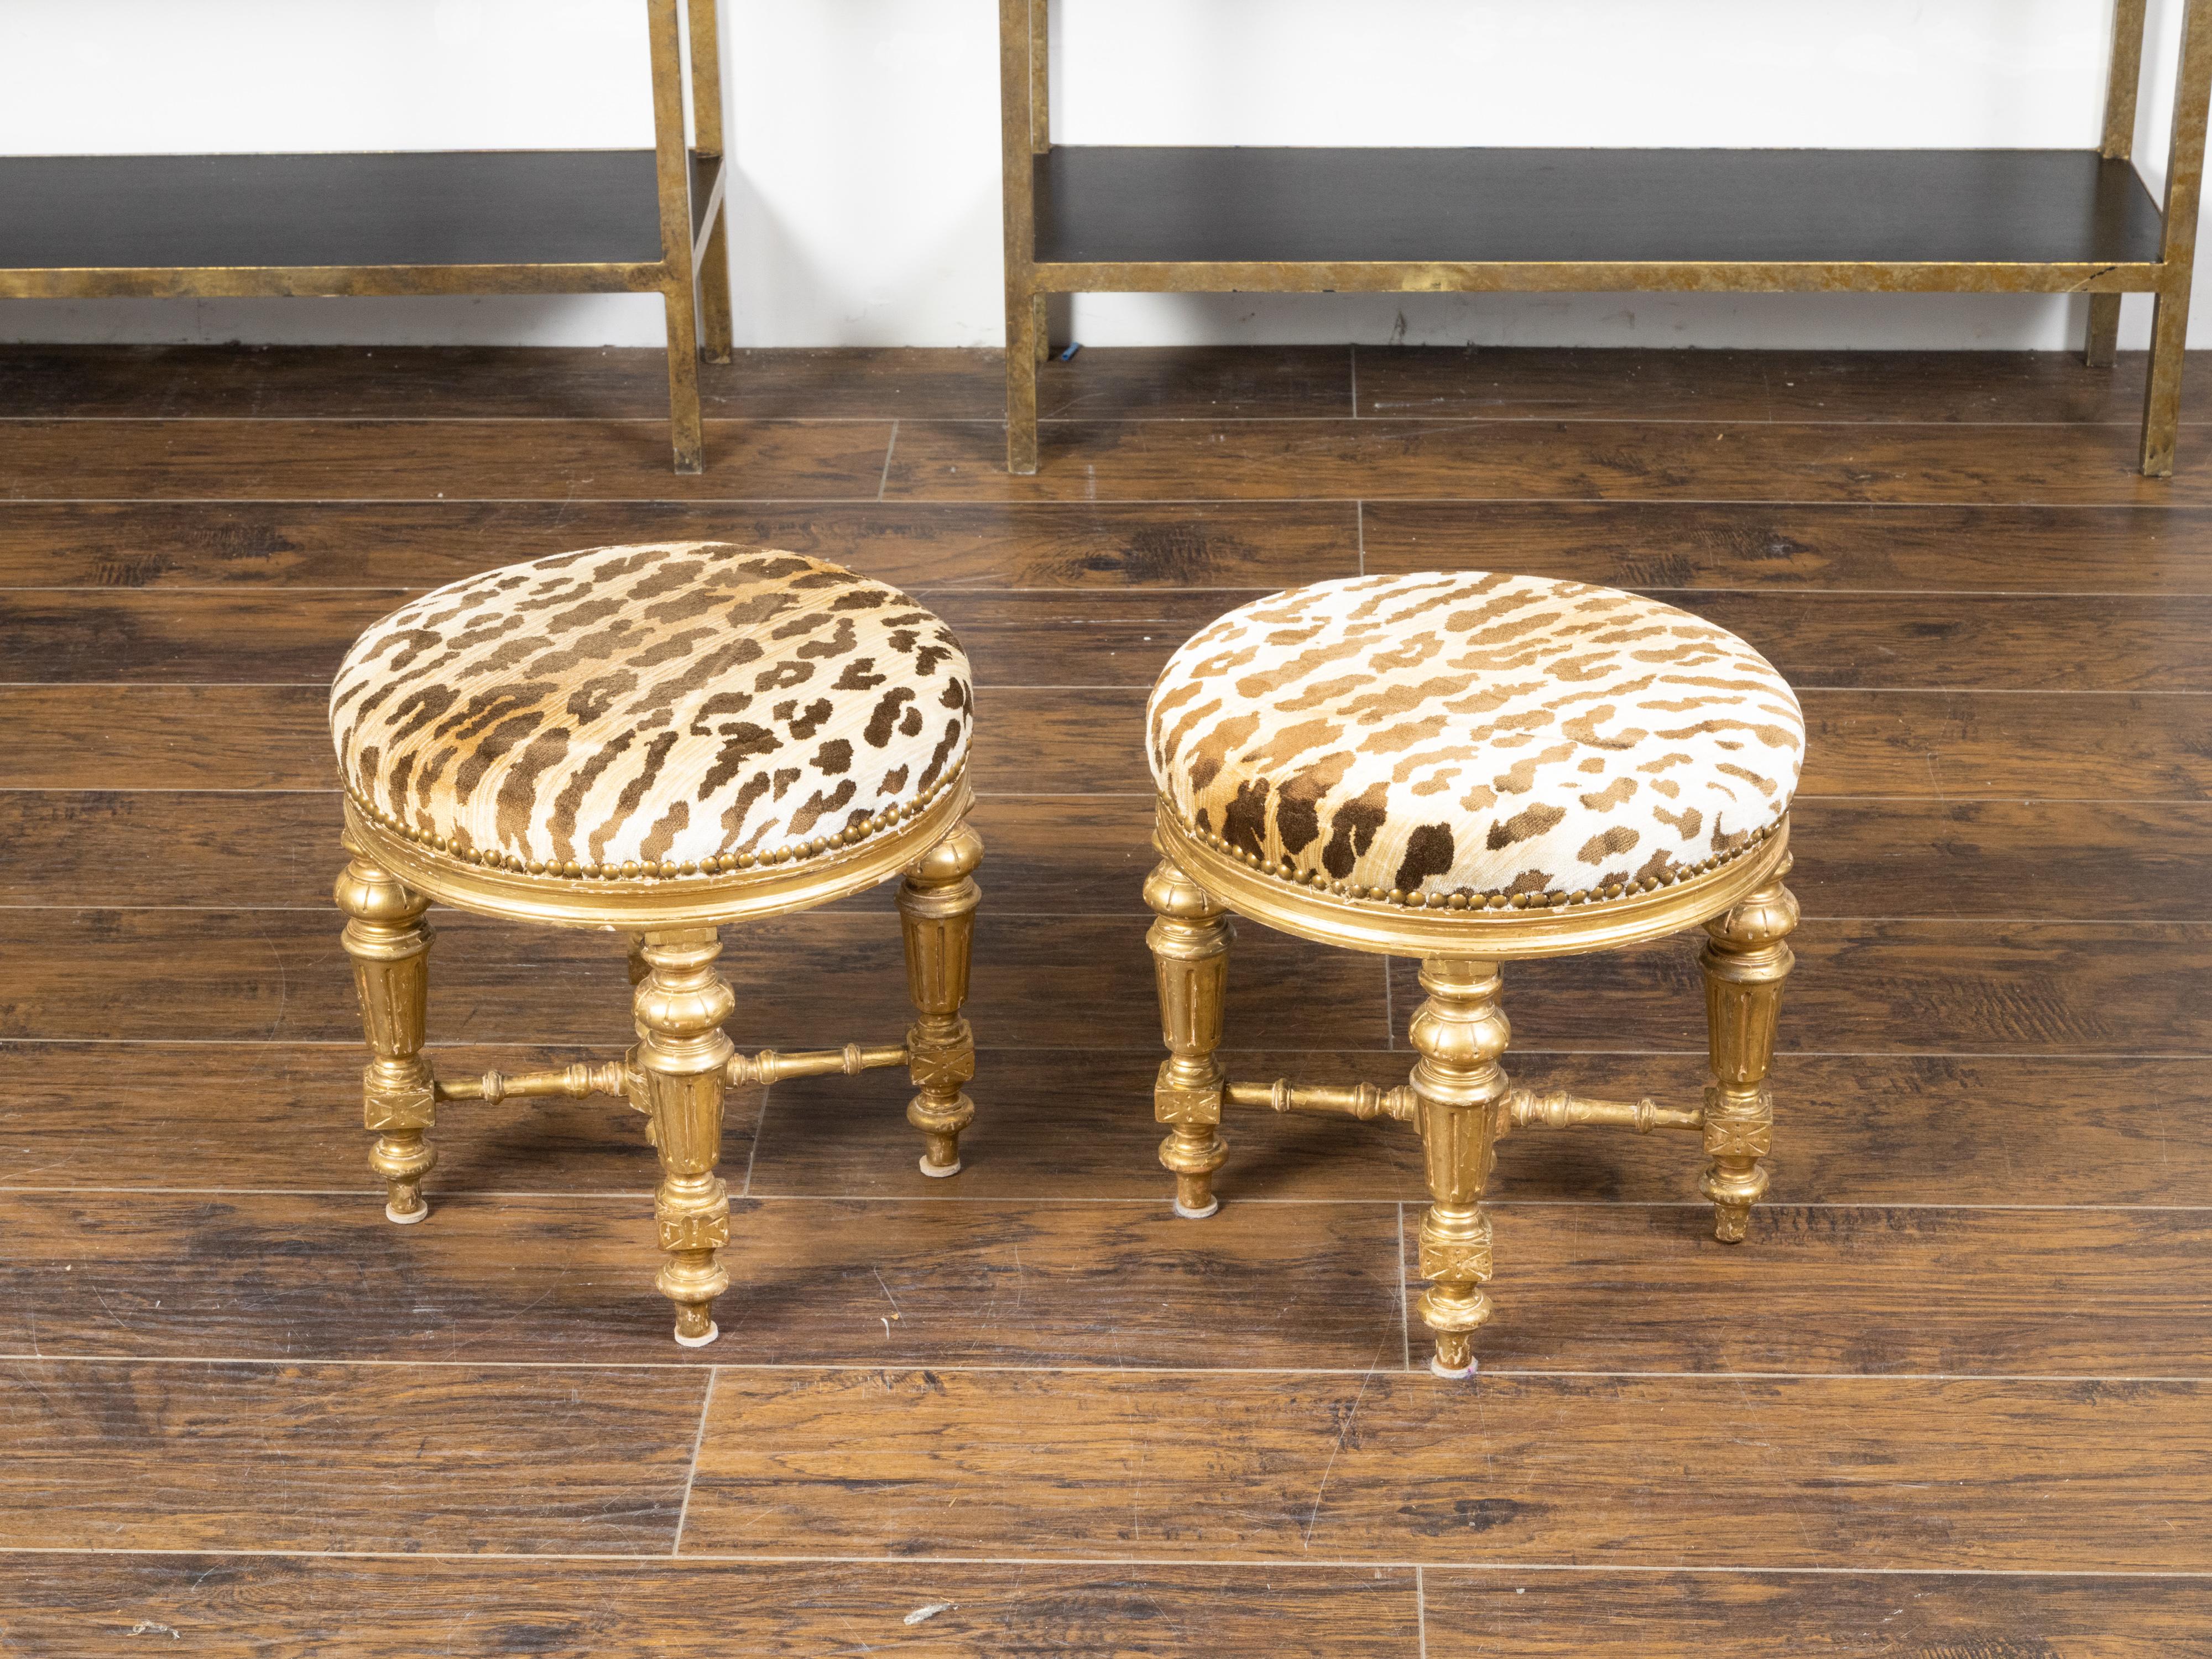 Pair of 19th Century French Giltwood Stools with Fluted Legs and Upholstery For Sale 4